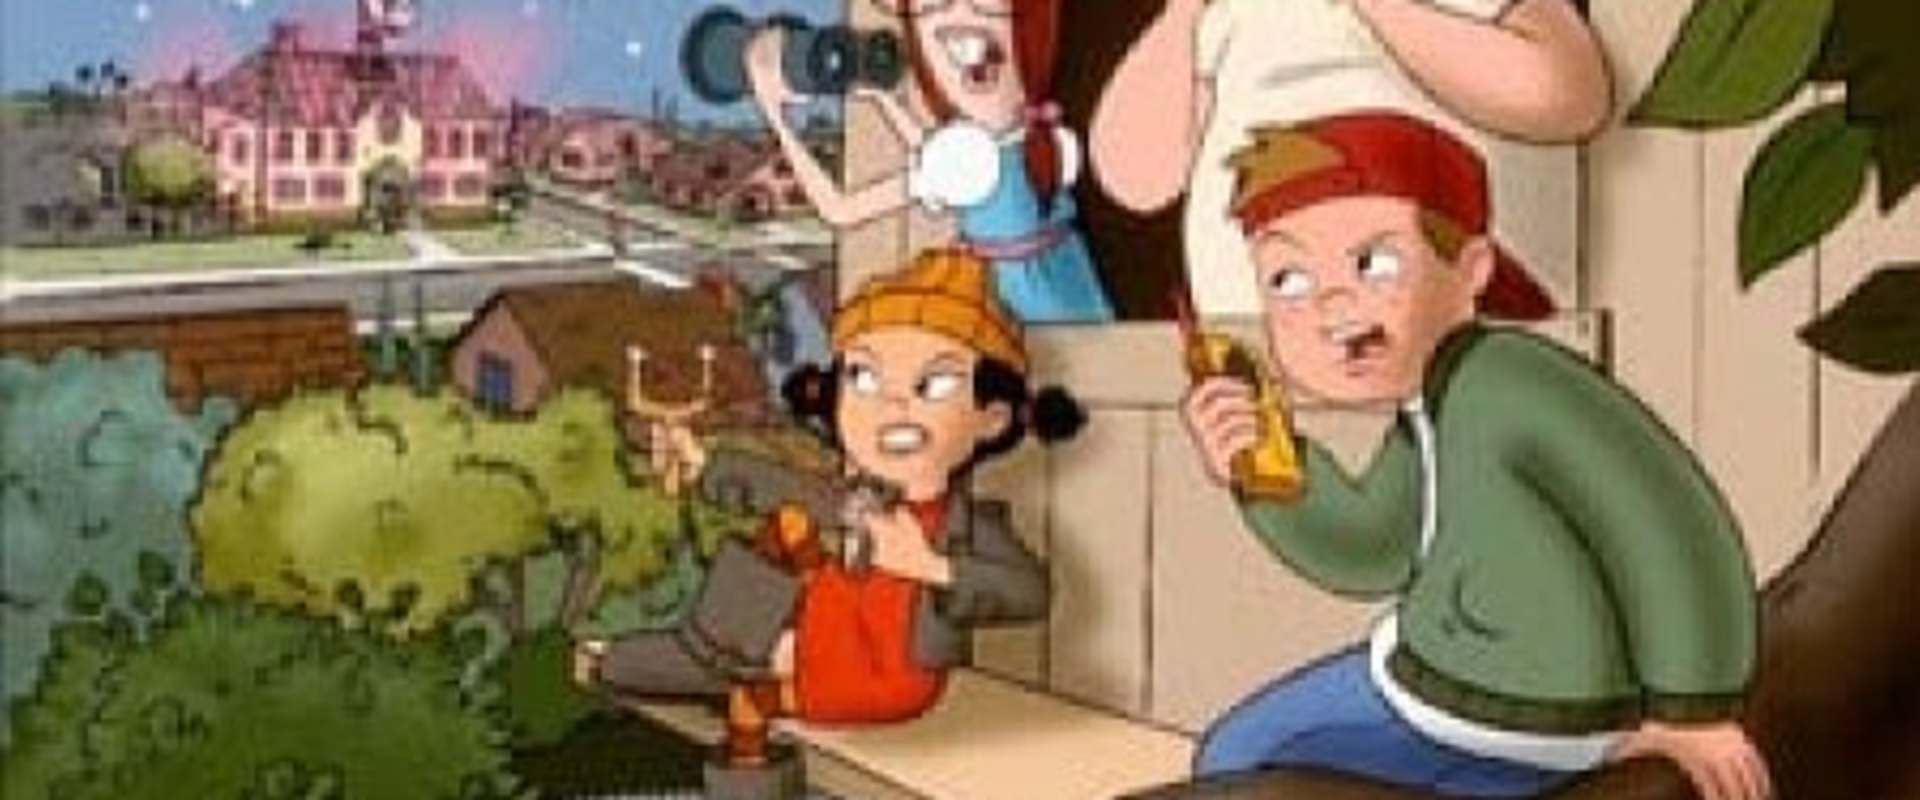 Recess: School's Out background 1